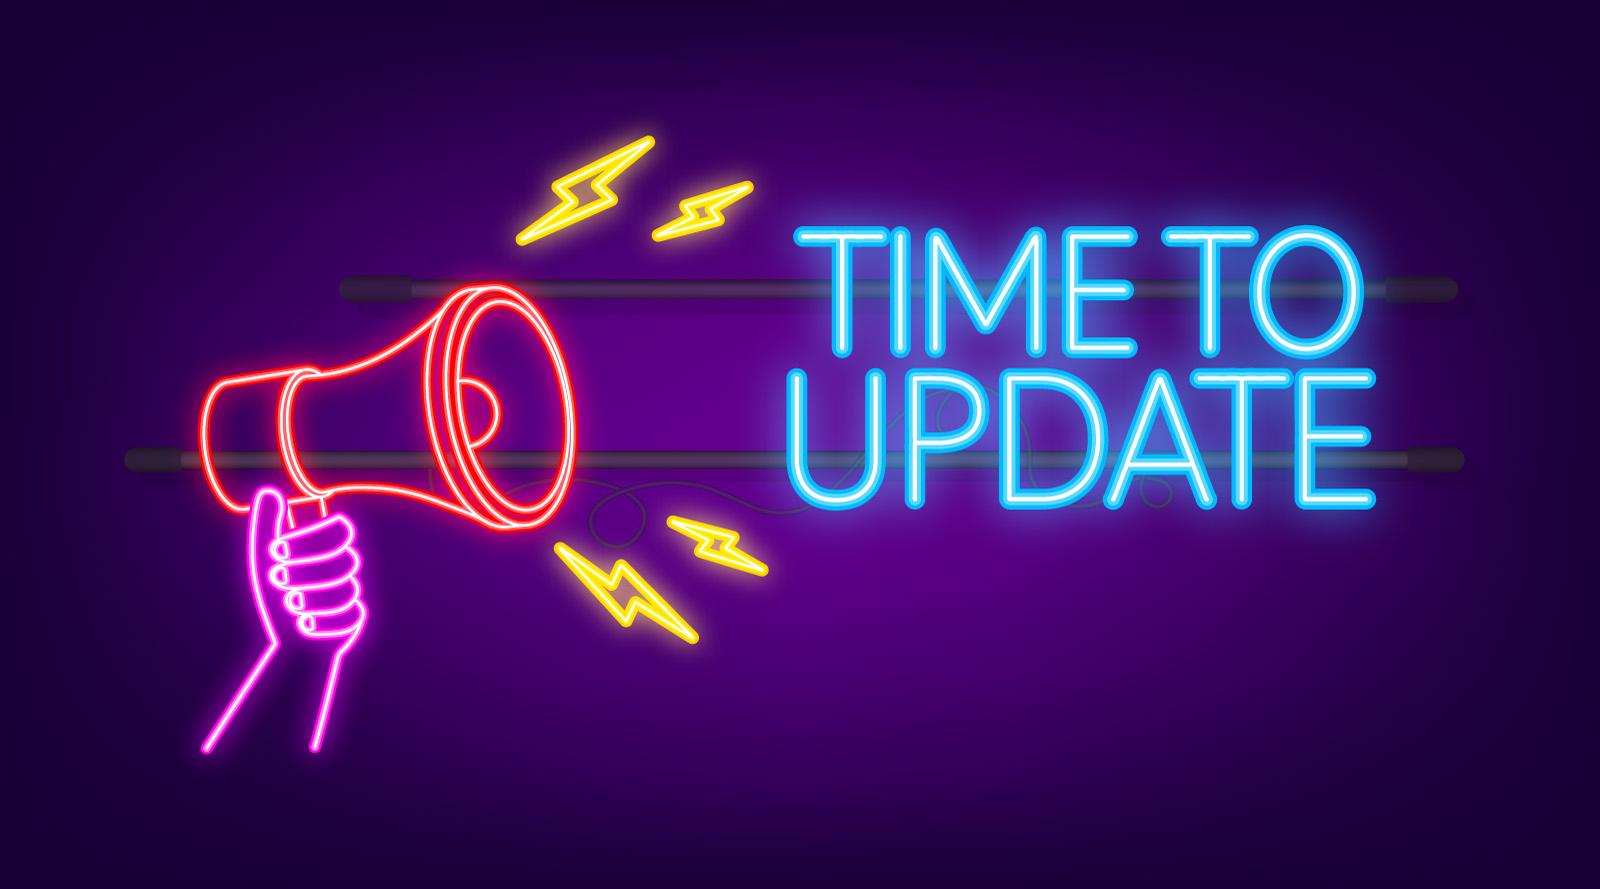 Time to Update Neon Sign